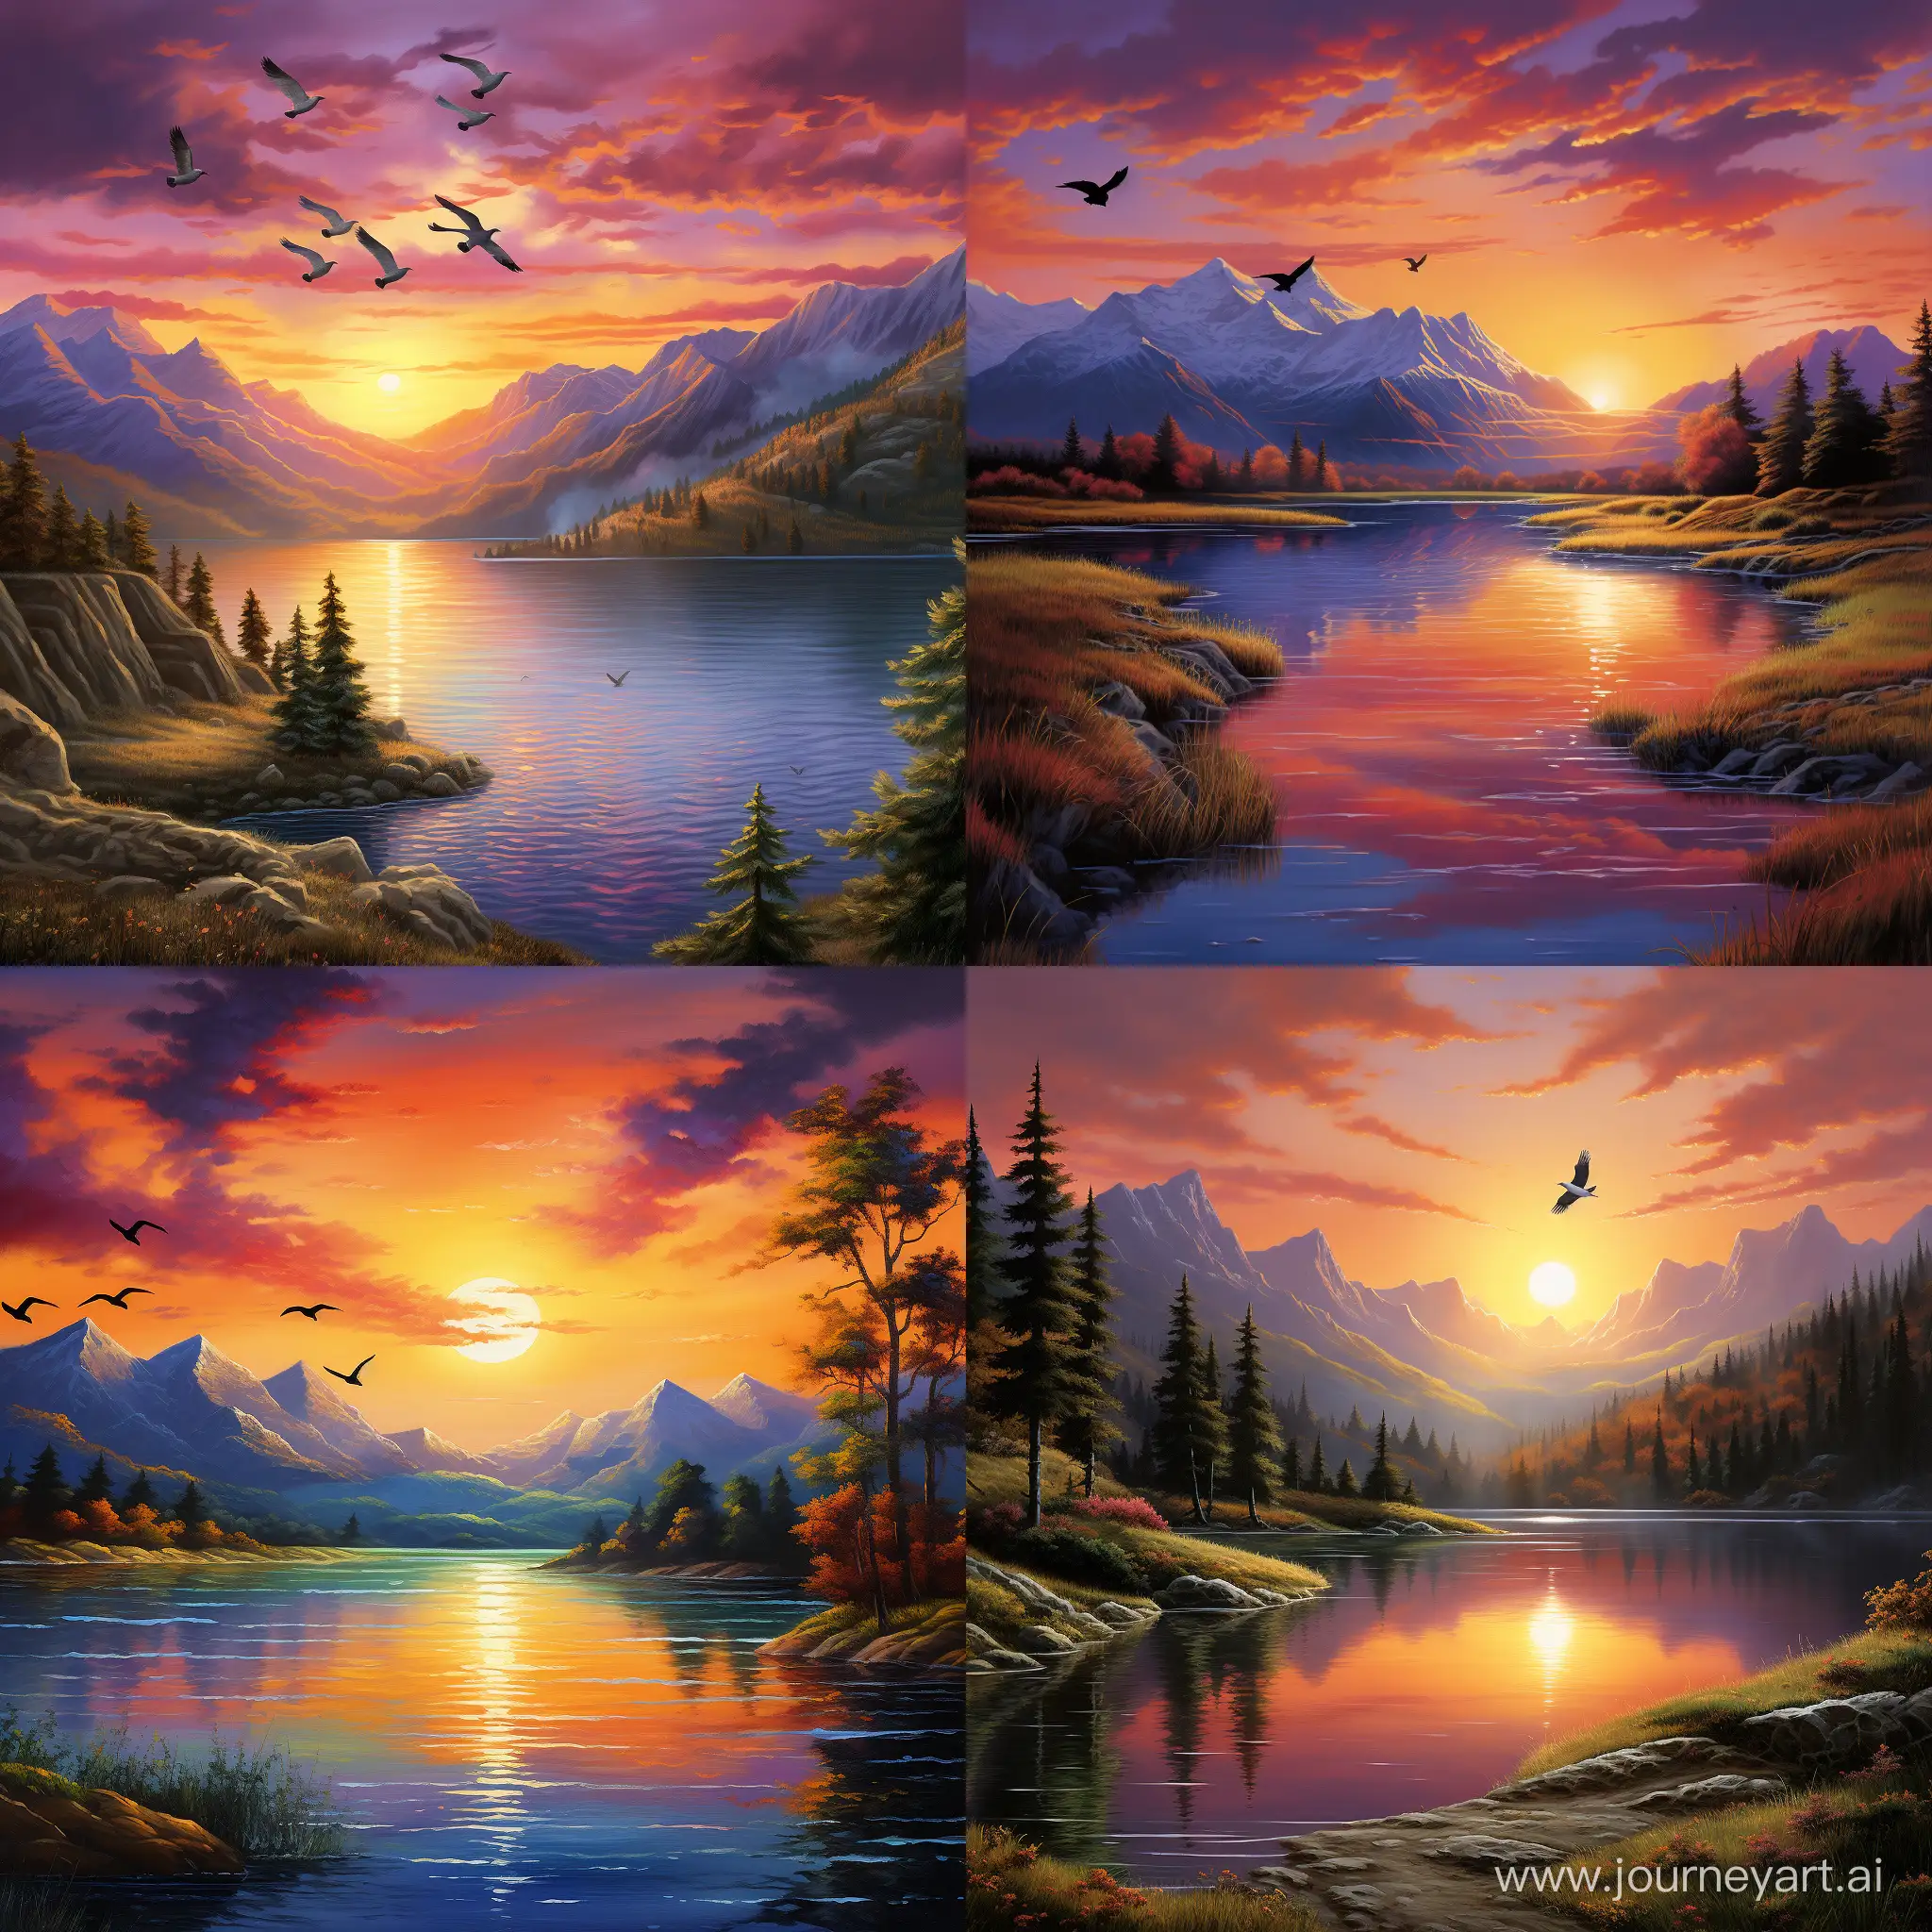 Generate a high-resolution image depicting a serene sunset over a mountainous landscape with a calm lake in the foreground. Ensure that the colors are vibrant, the details are sharp, and the overall composition is visually appealing. Optionally, include a few birds in the sky to enhance the natural atmosphere.